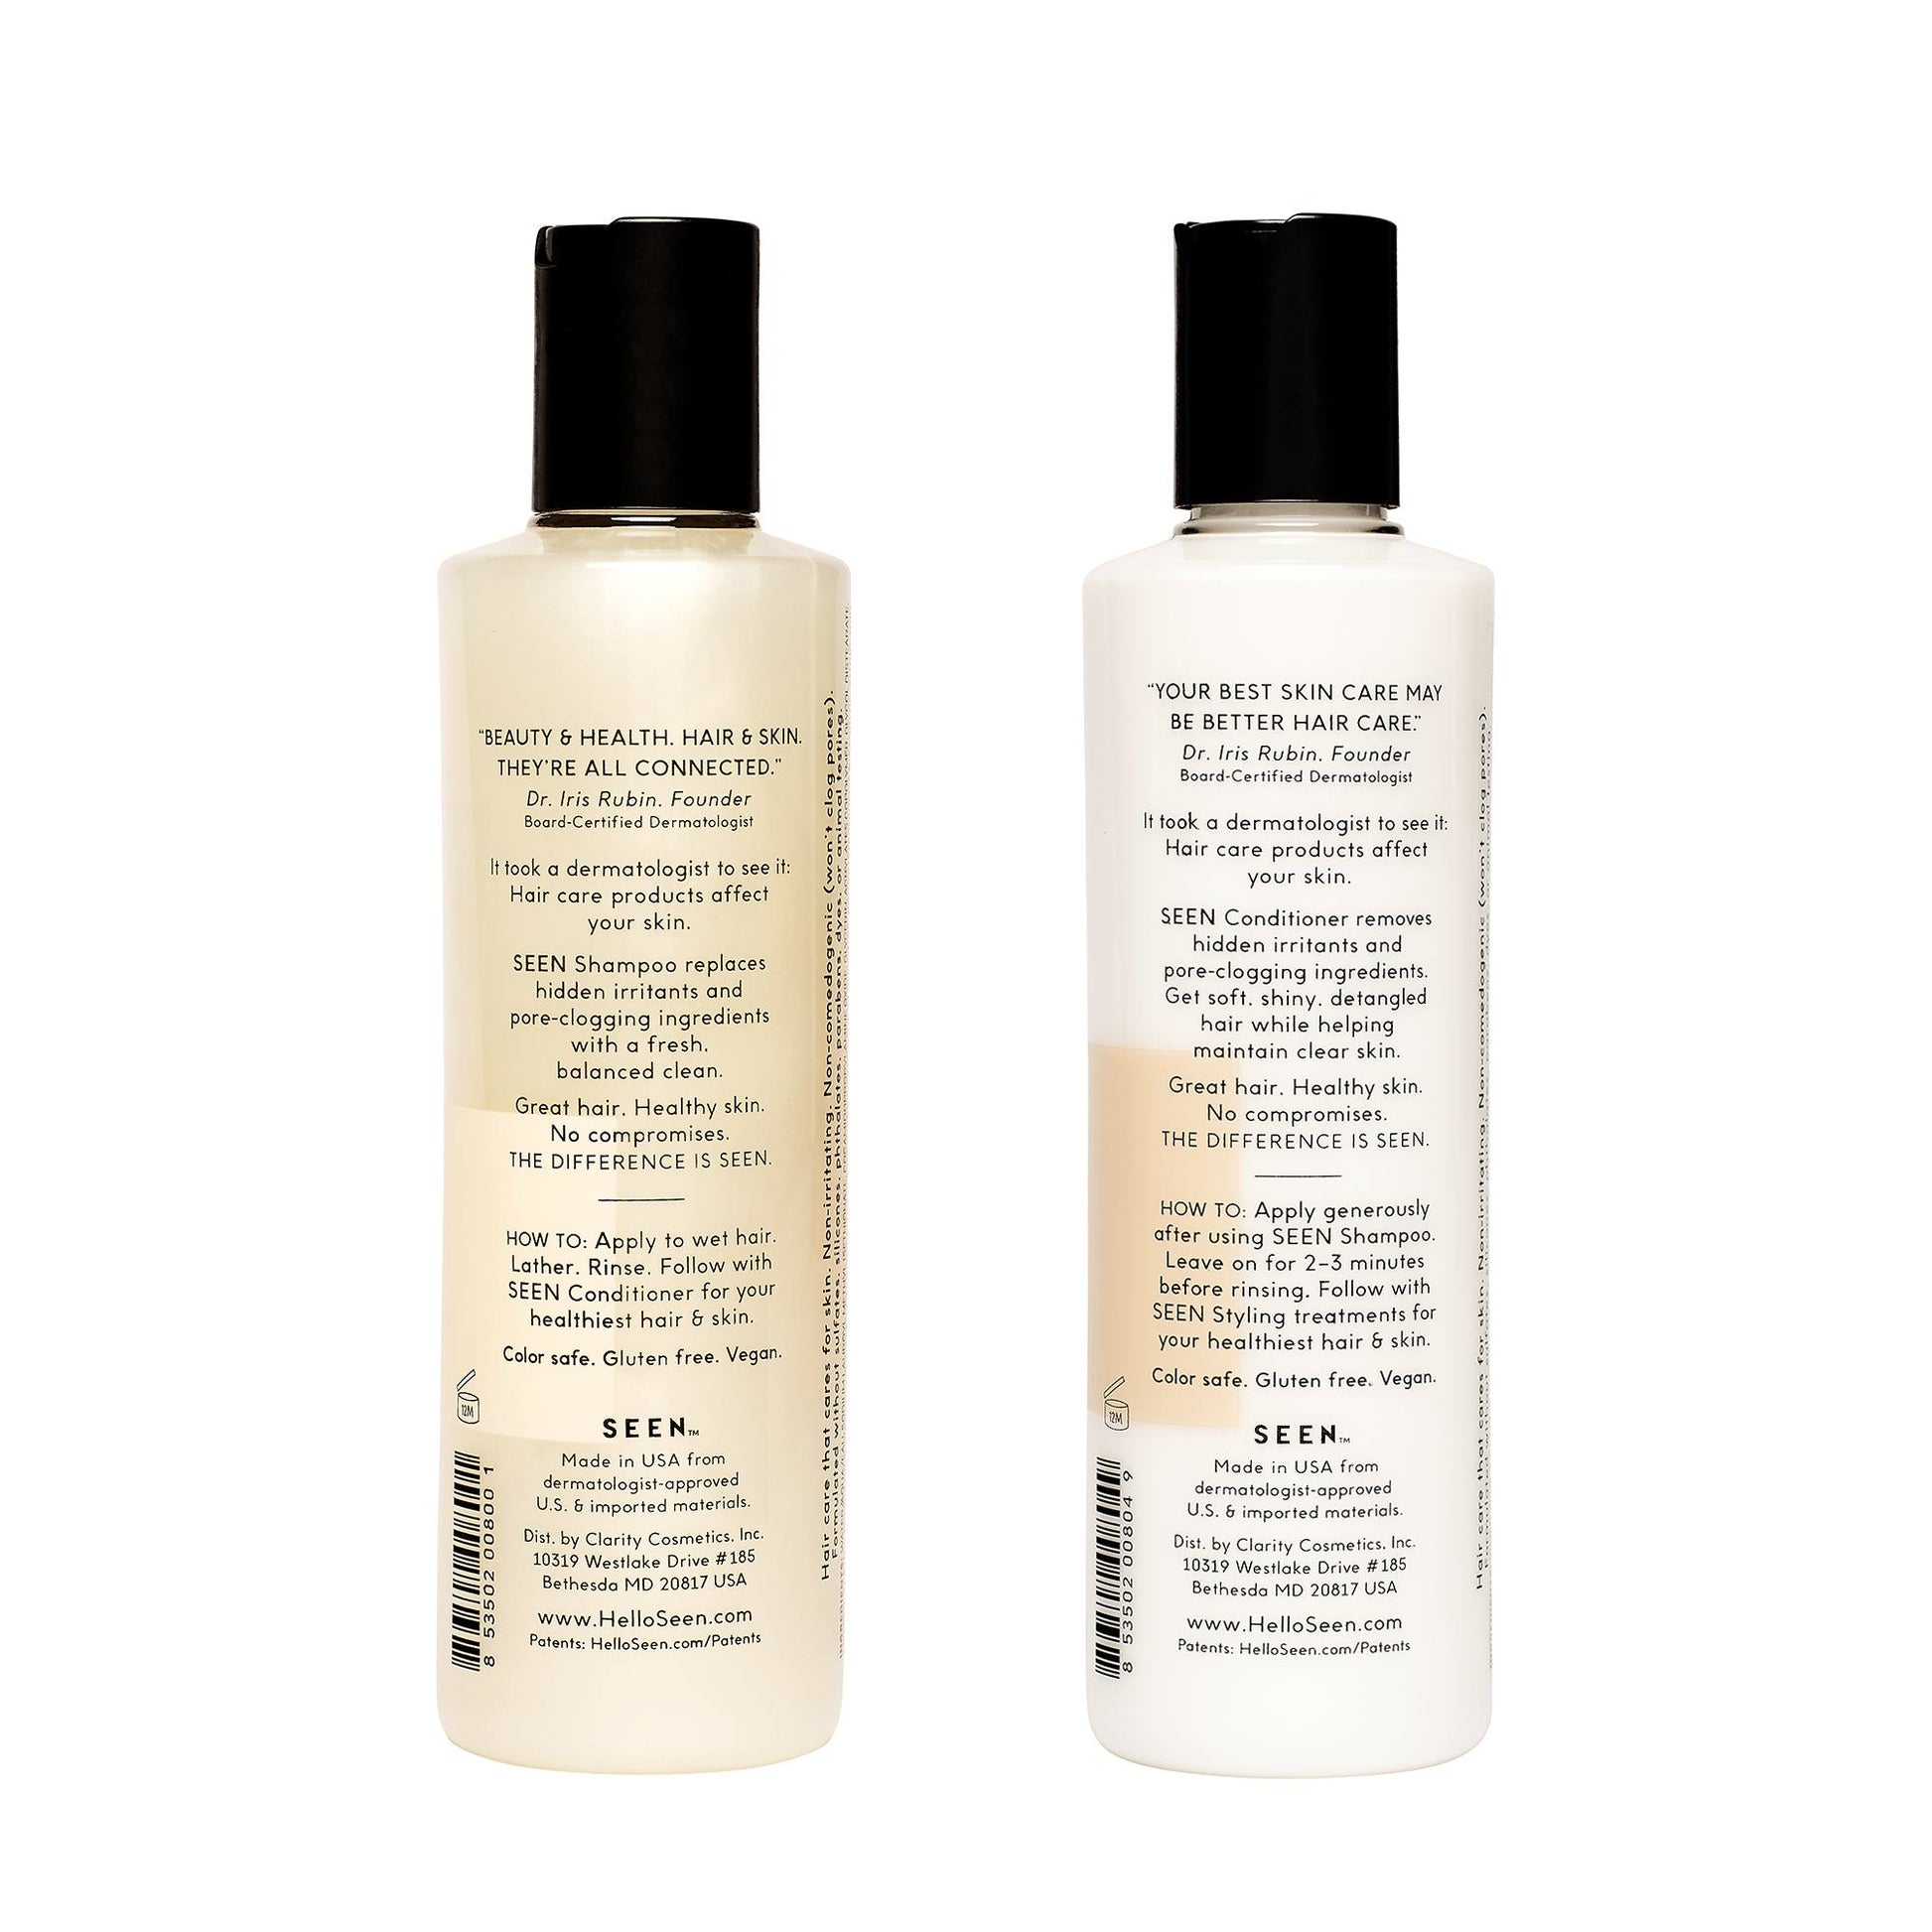 the good stuff hair  No-rinse conditioners & gentle shampoo